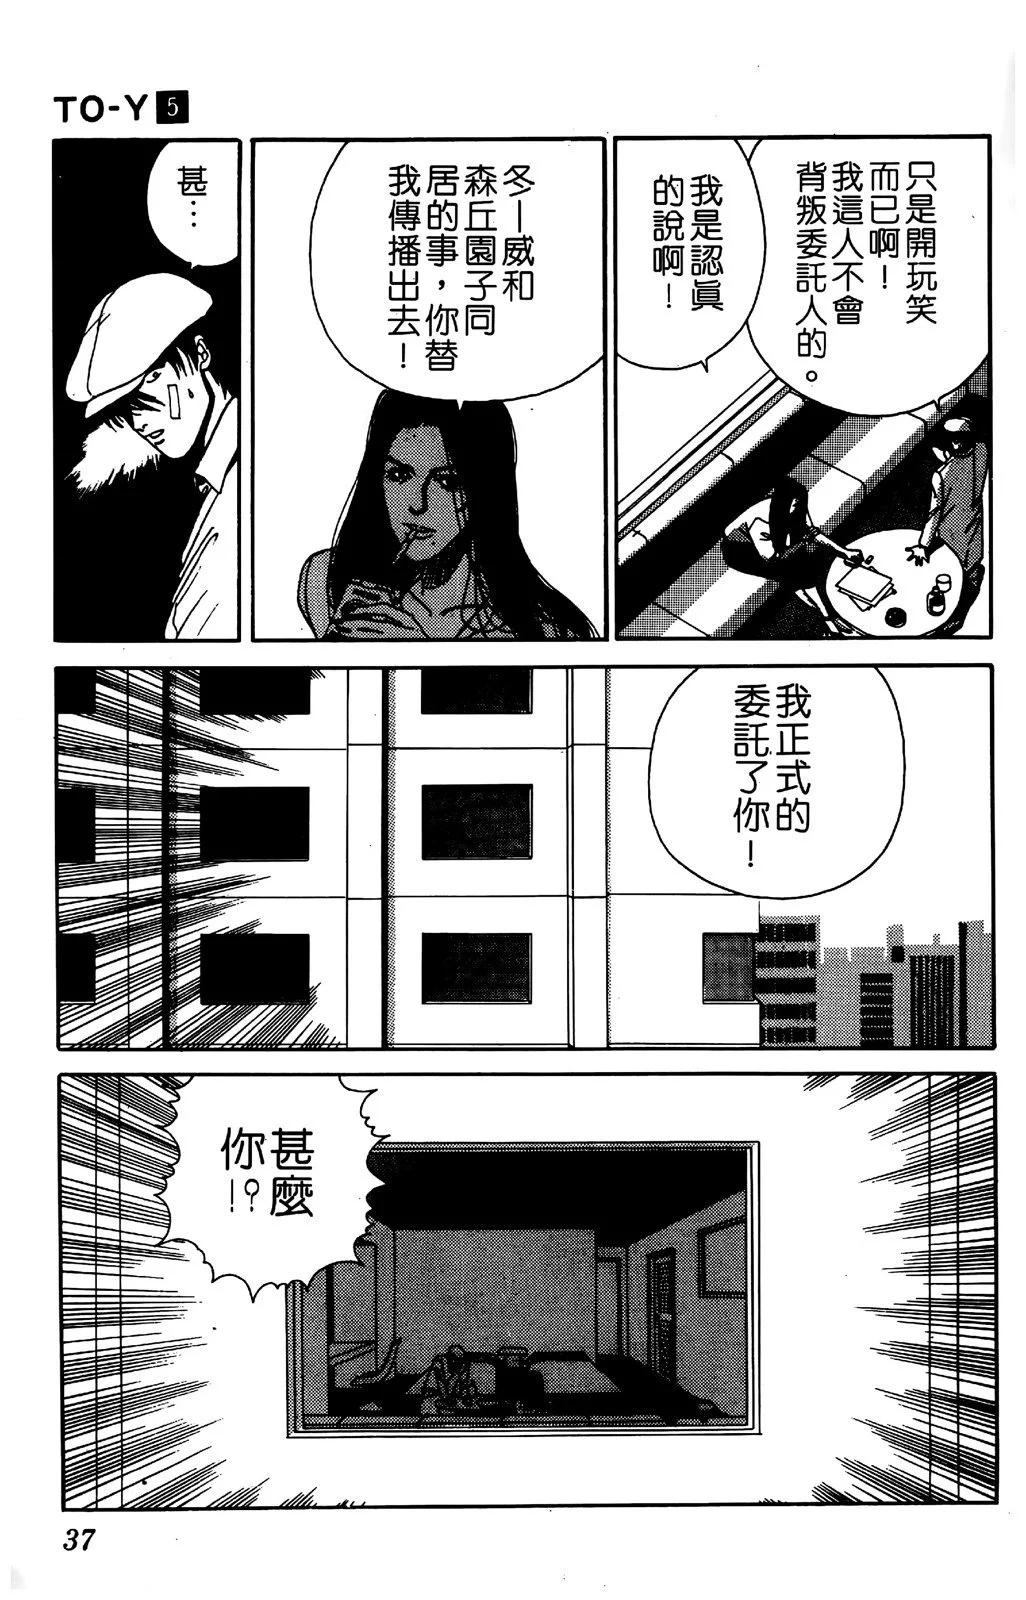 TO-Y - 第05卷(1/4) - 7